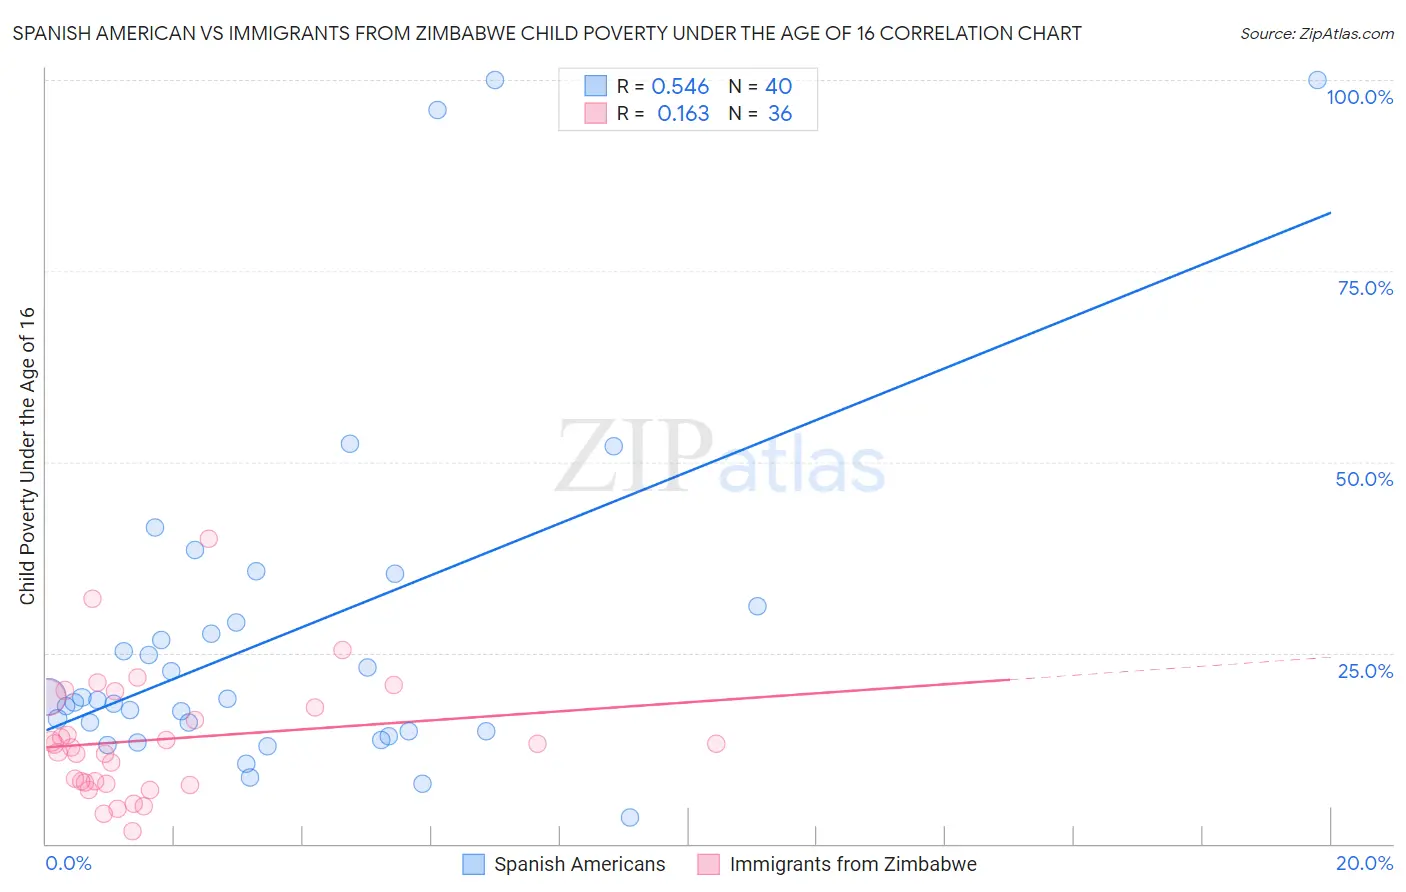 Spanish American vs Immigrants from Zimbabwe Child Poverty Under the Age of 16